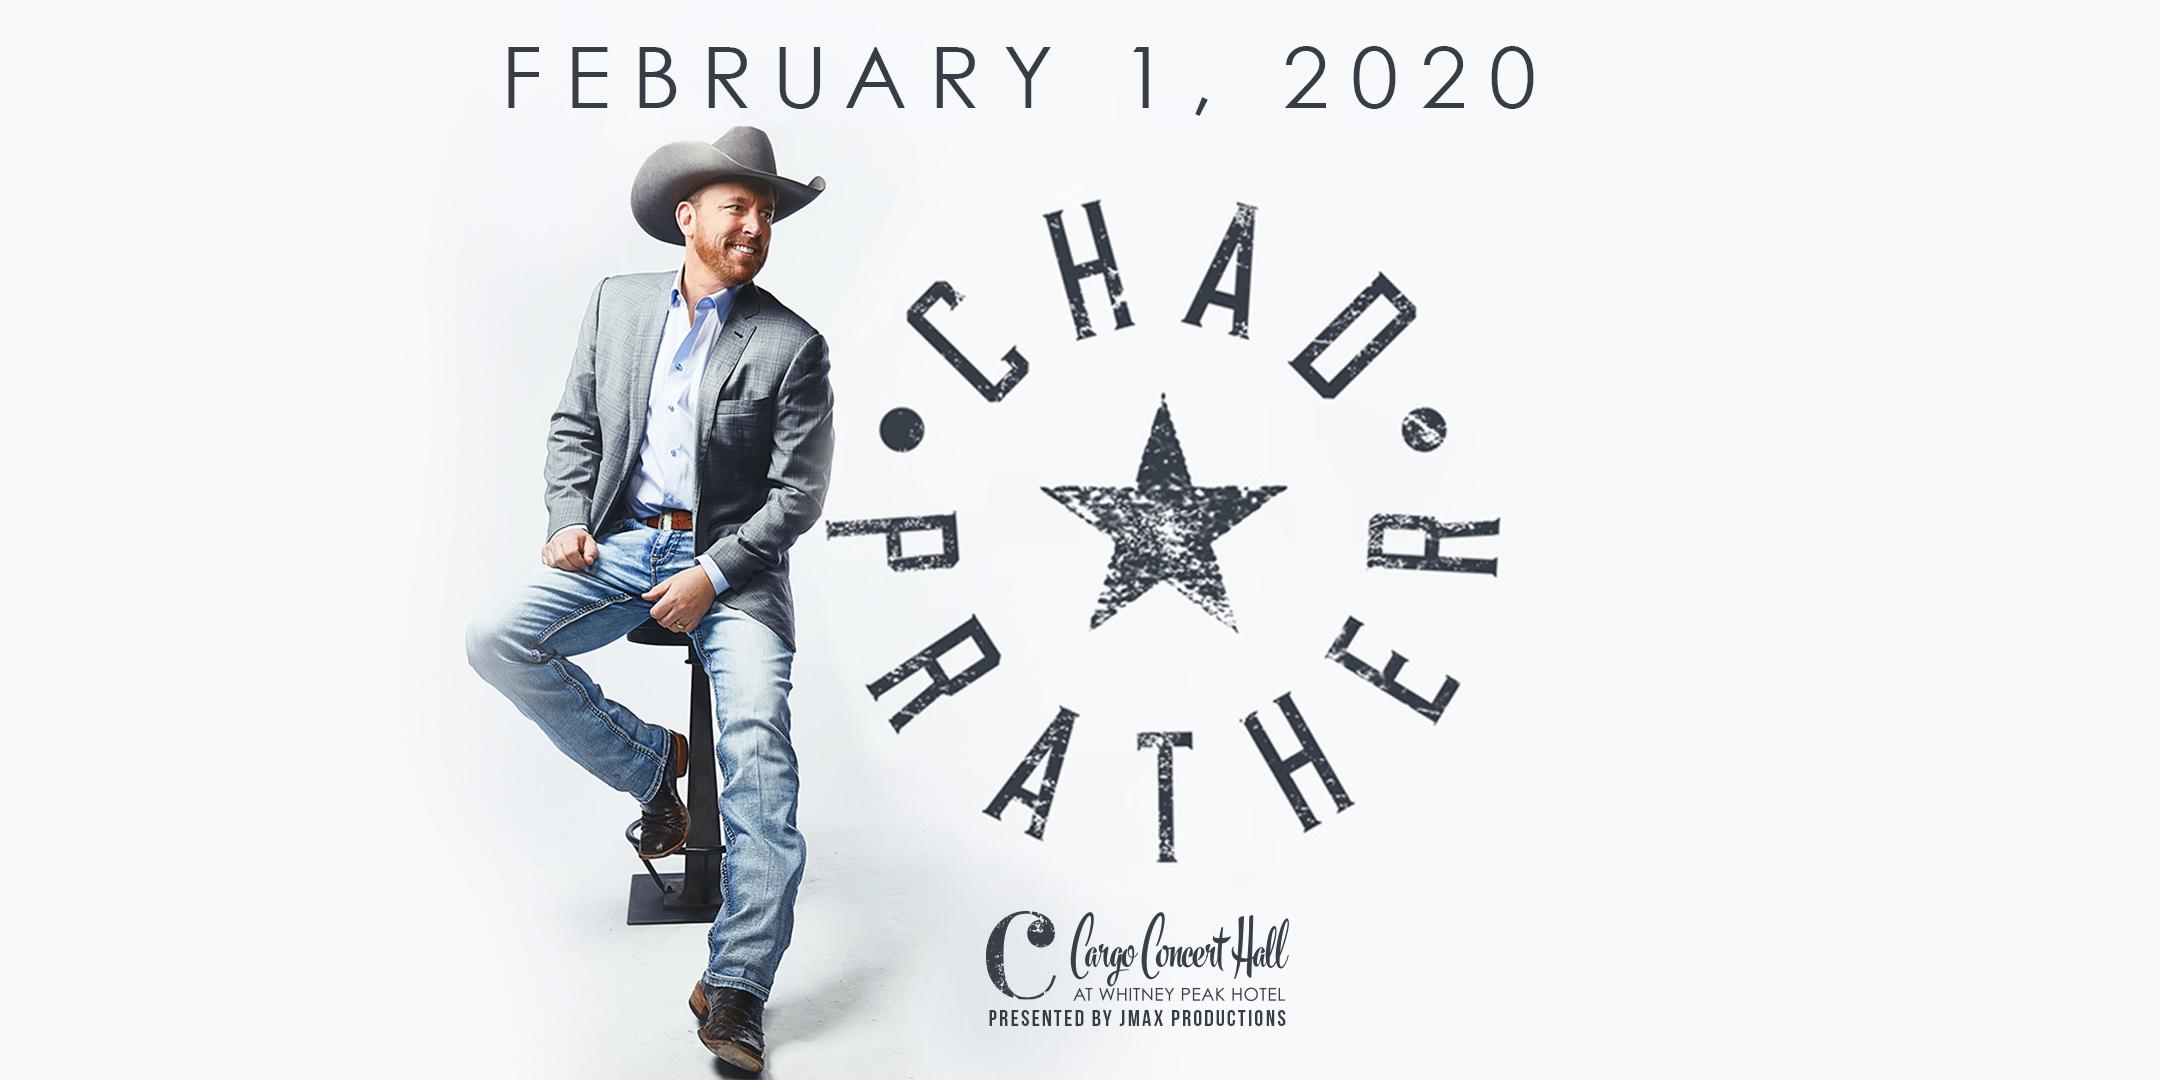 Chad Prather at Cargo Concert Hall